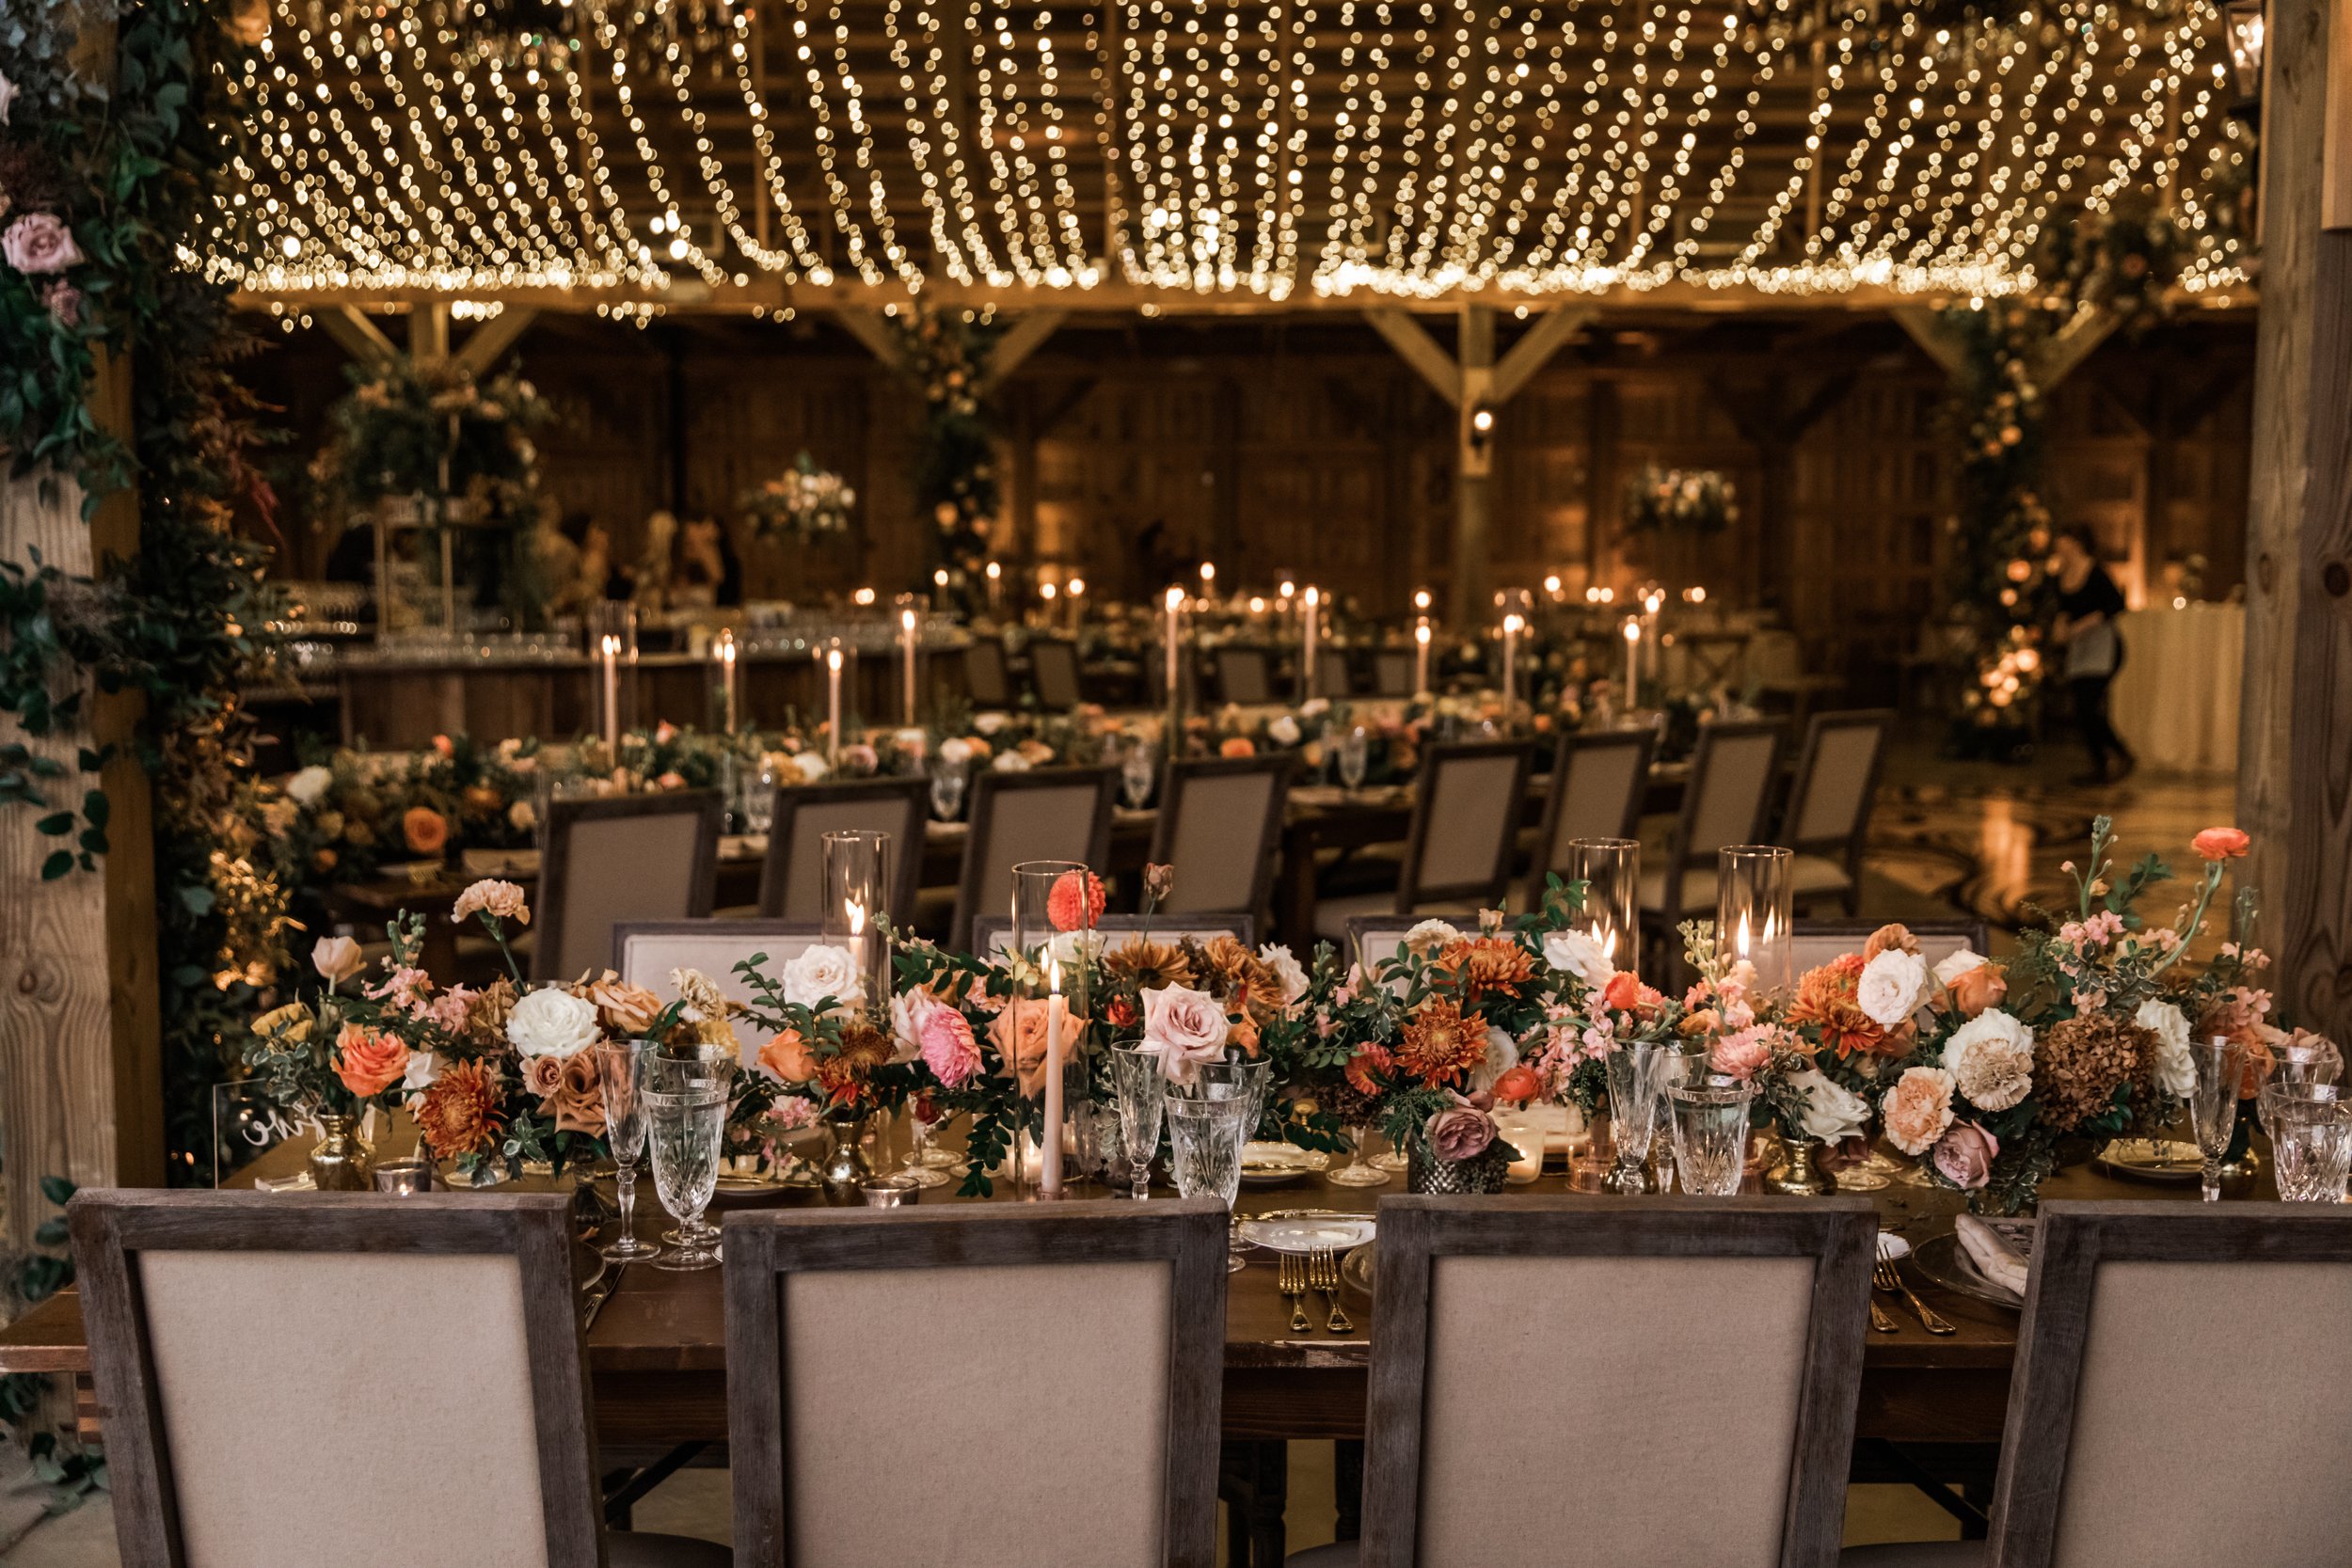 Beautiful fall floral centerpieces warm this reception space with a sunset color palette. Garden roses, ranunculus, double brownie tulips, and lisianthus create hues of terra cotta, blush pink, copper, and yellow. Designed by Rosemary and Finch in Na